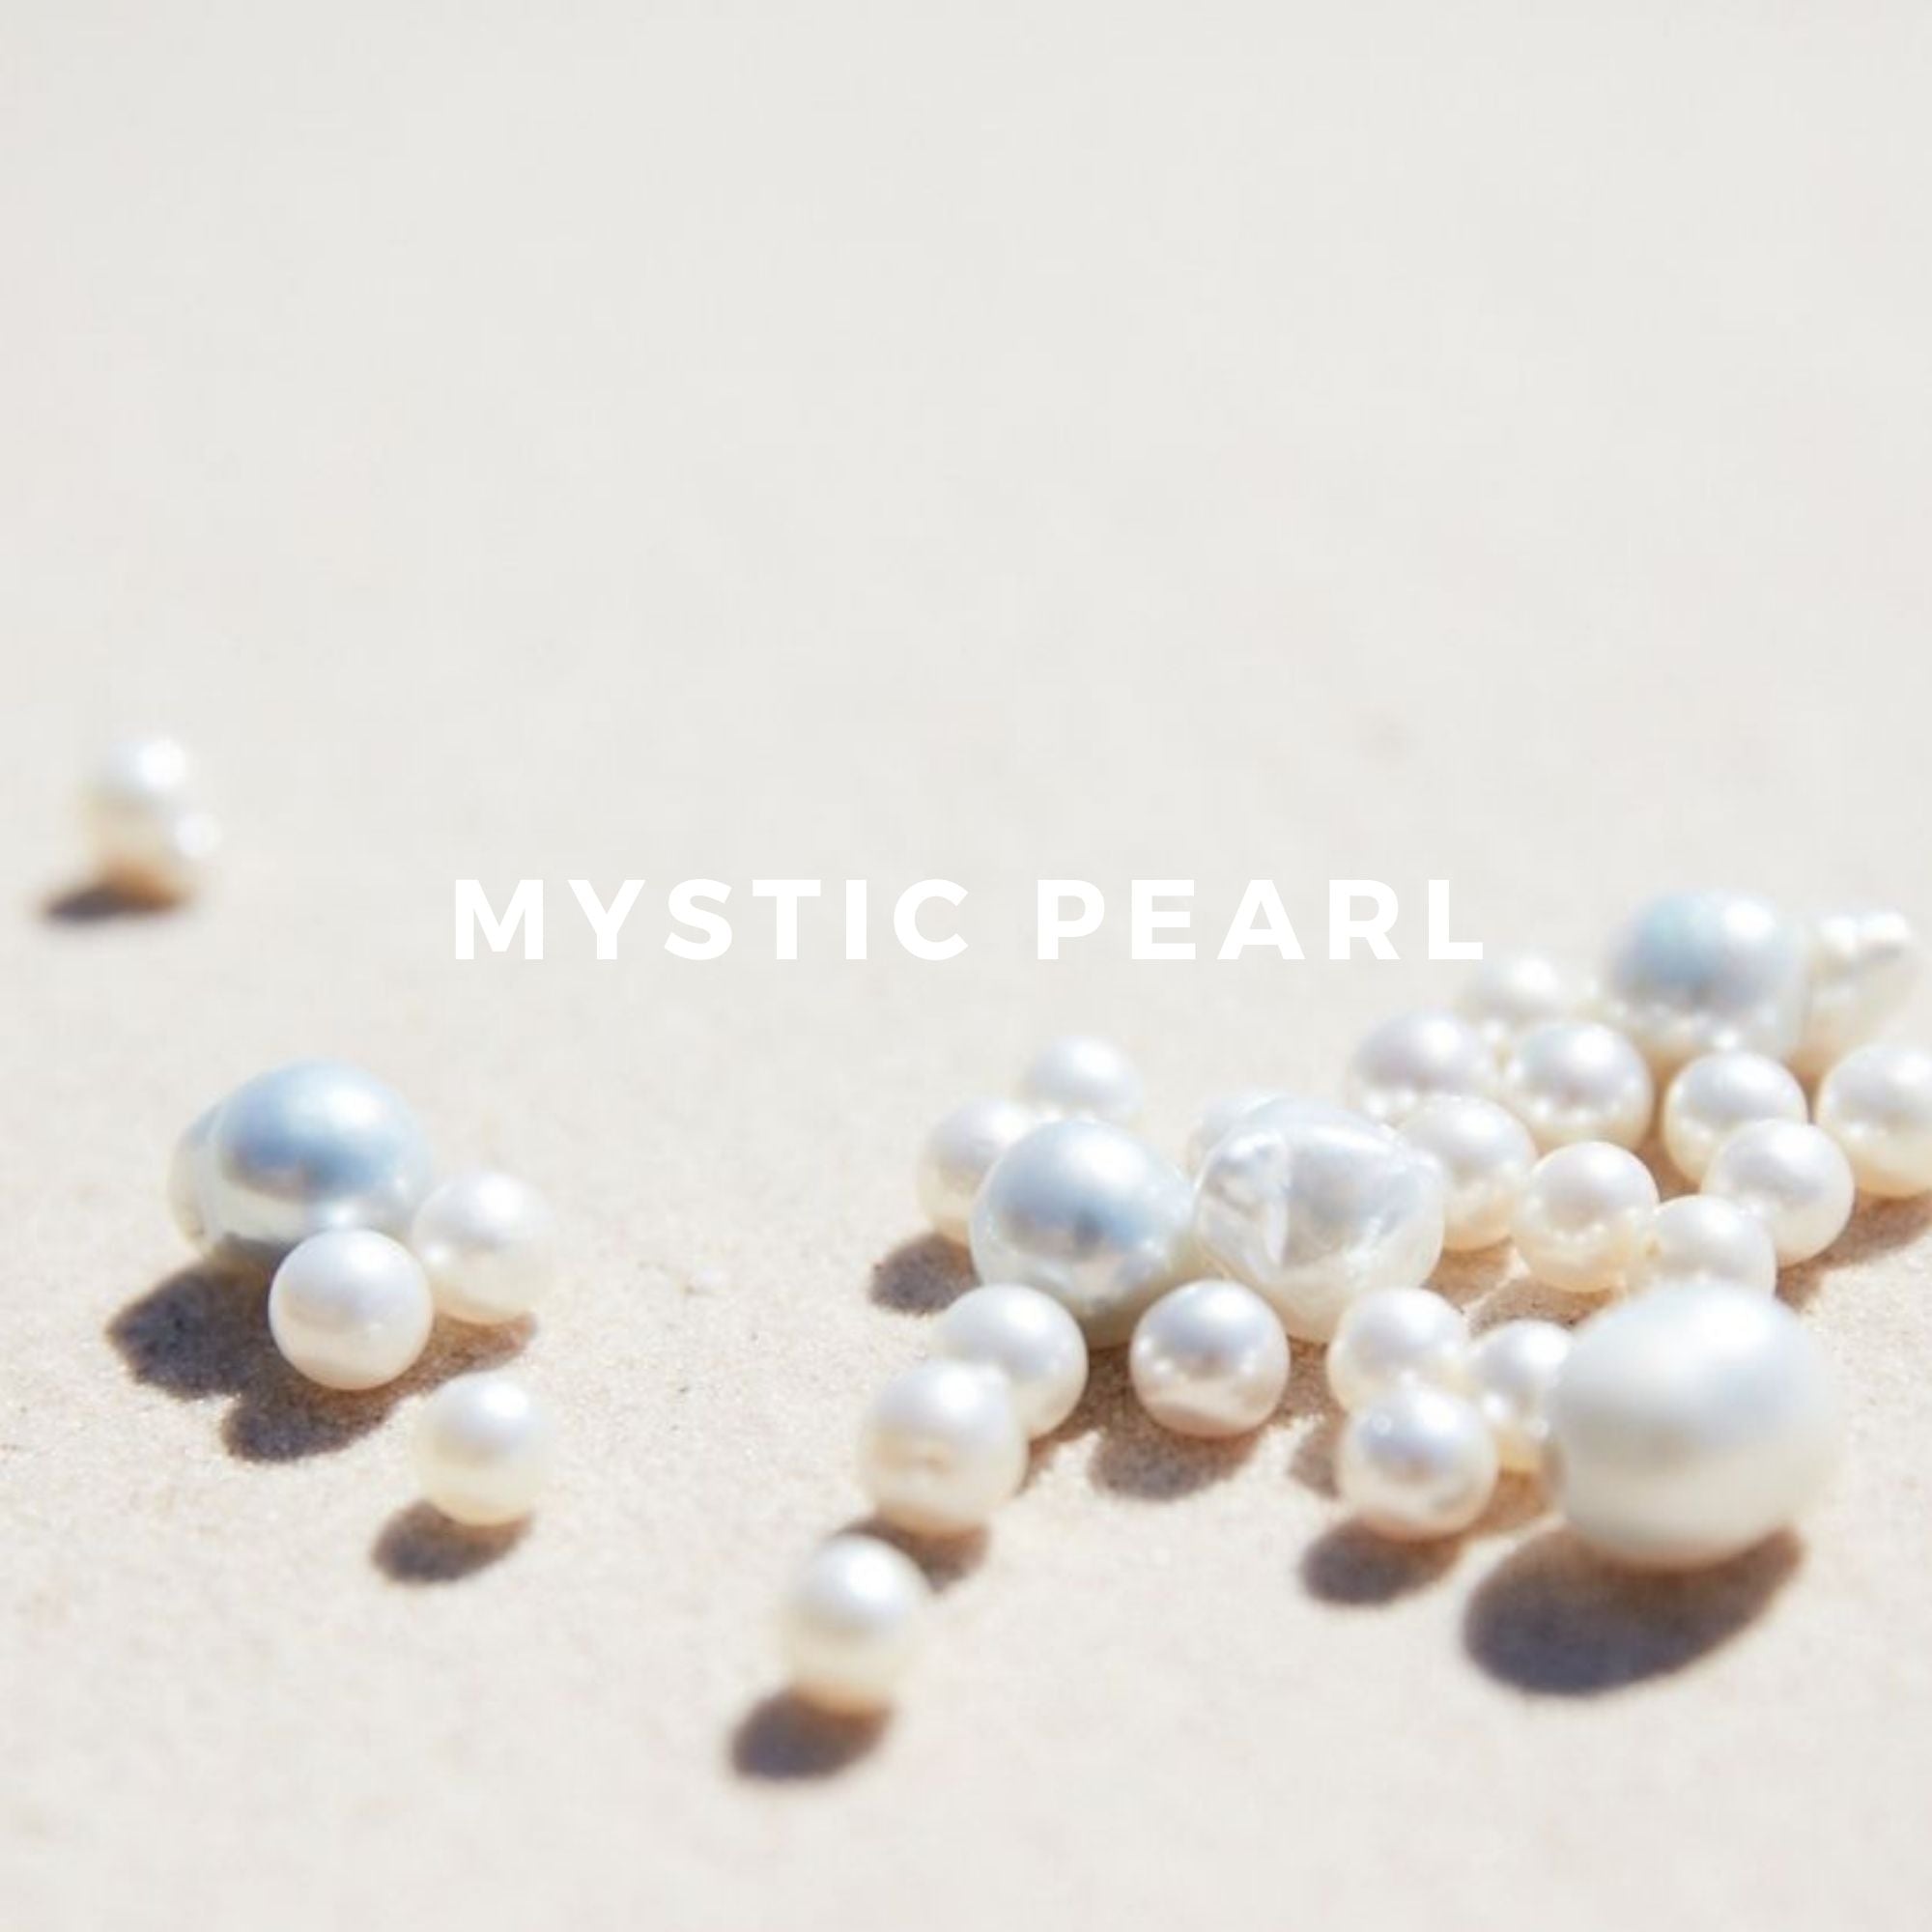 Mystic Pearl is particularly unique because we created it using the scent from real South Sea pearls, giving Mystic Pearl its opening burst of ocean freshness, drying down to notes of tropical white flowers, ylang ylang and frangipani, a touch of coconut, and a hint of warmth from tropical spices, cinnamon and nutmeg.